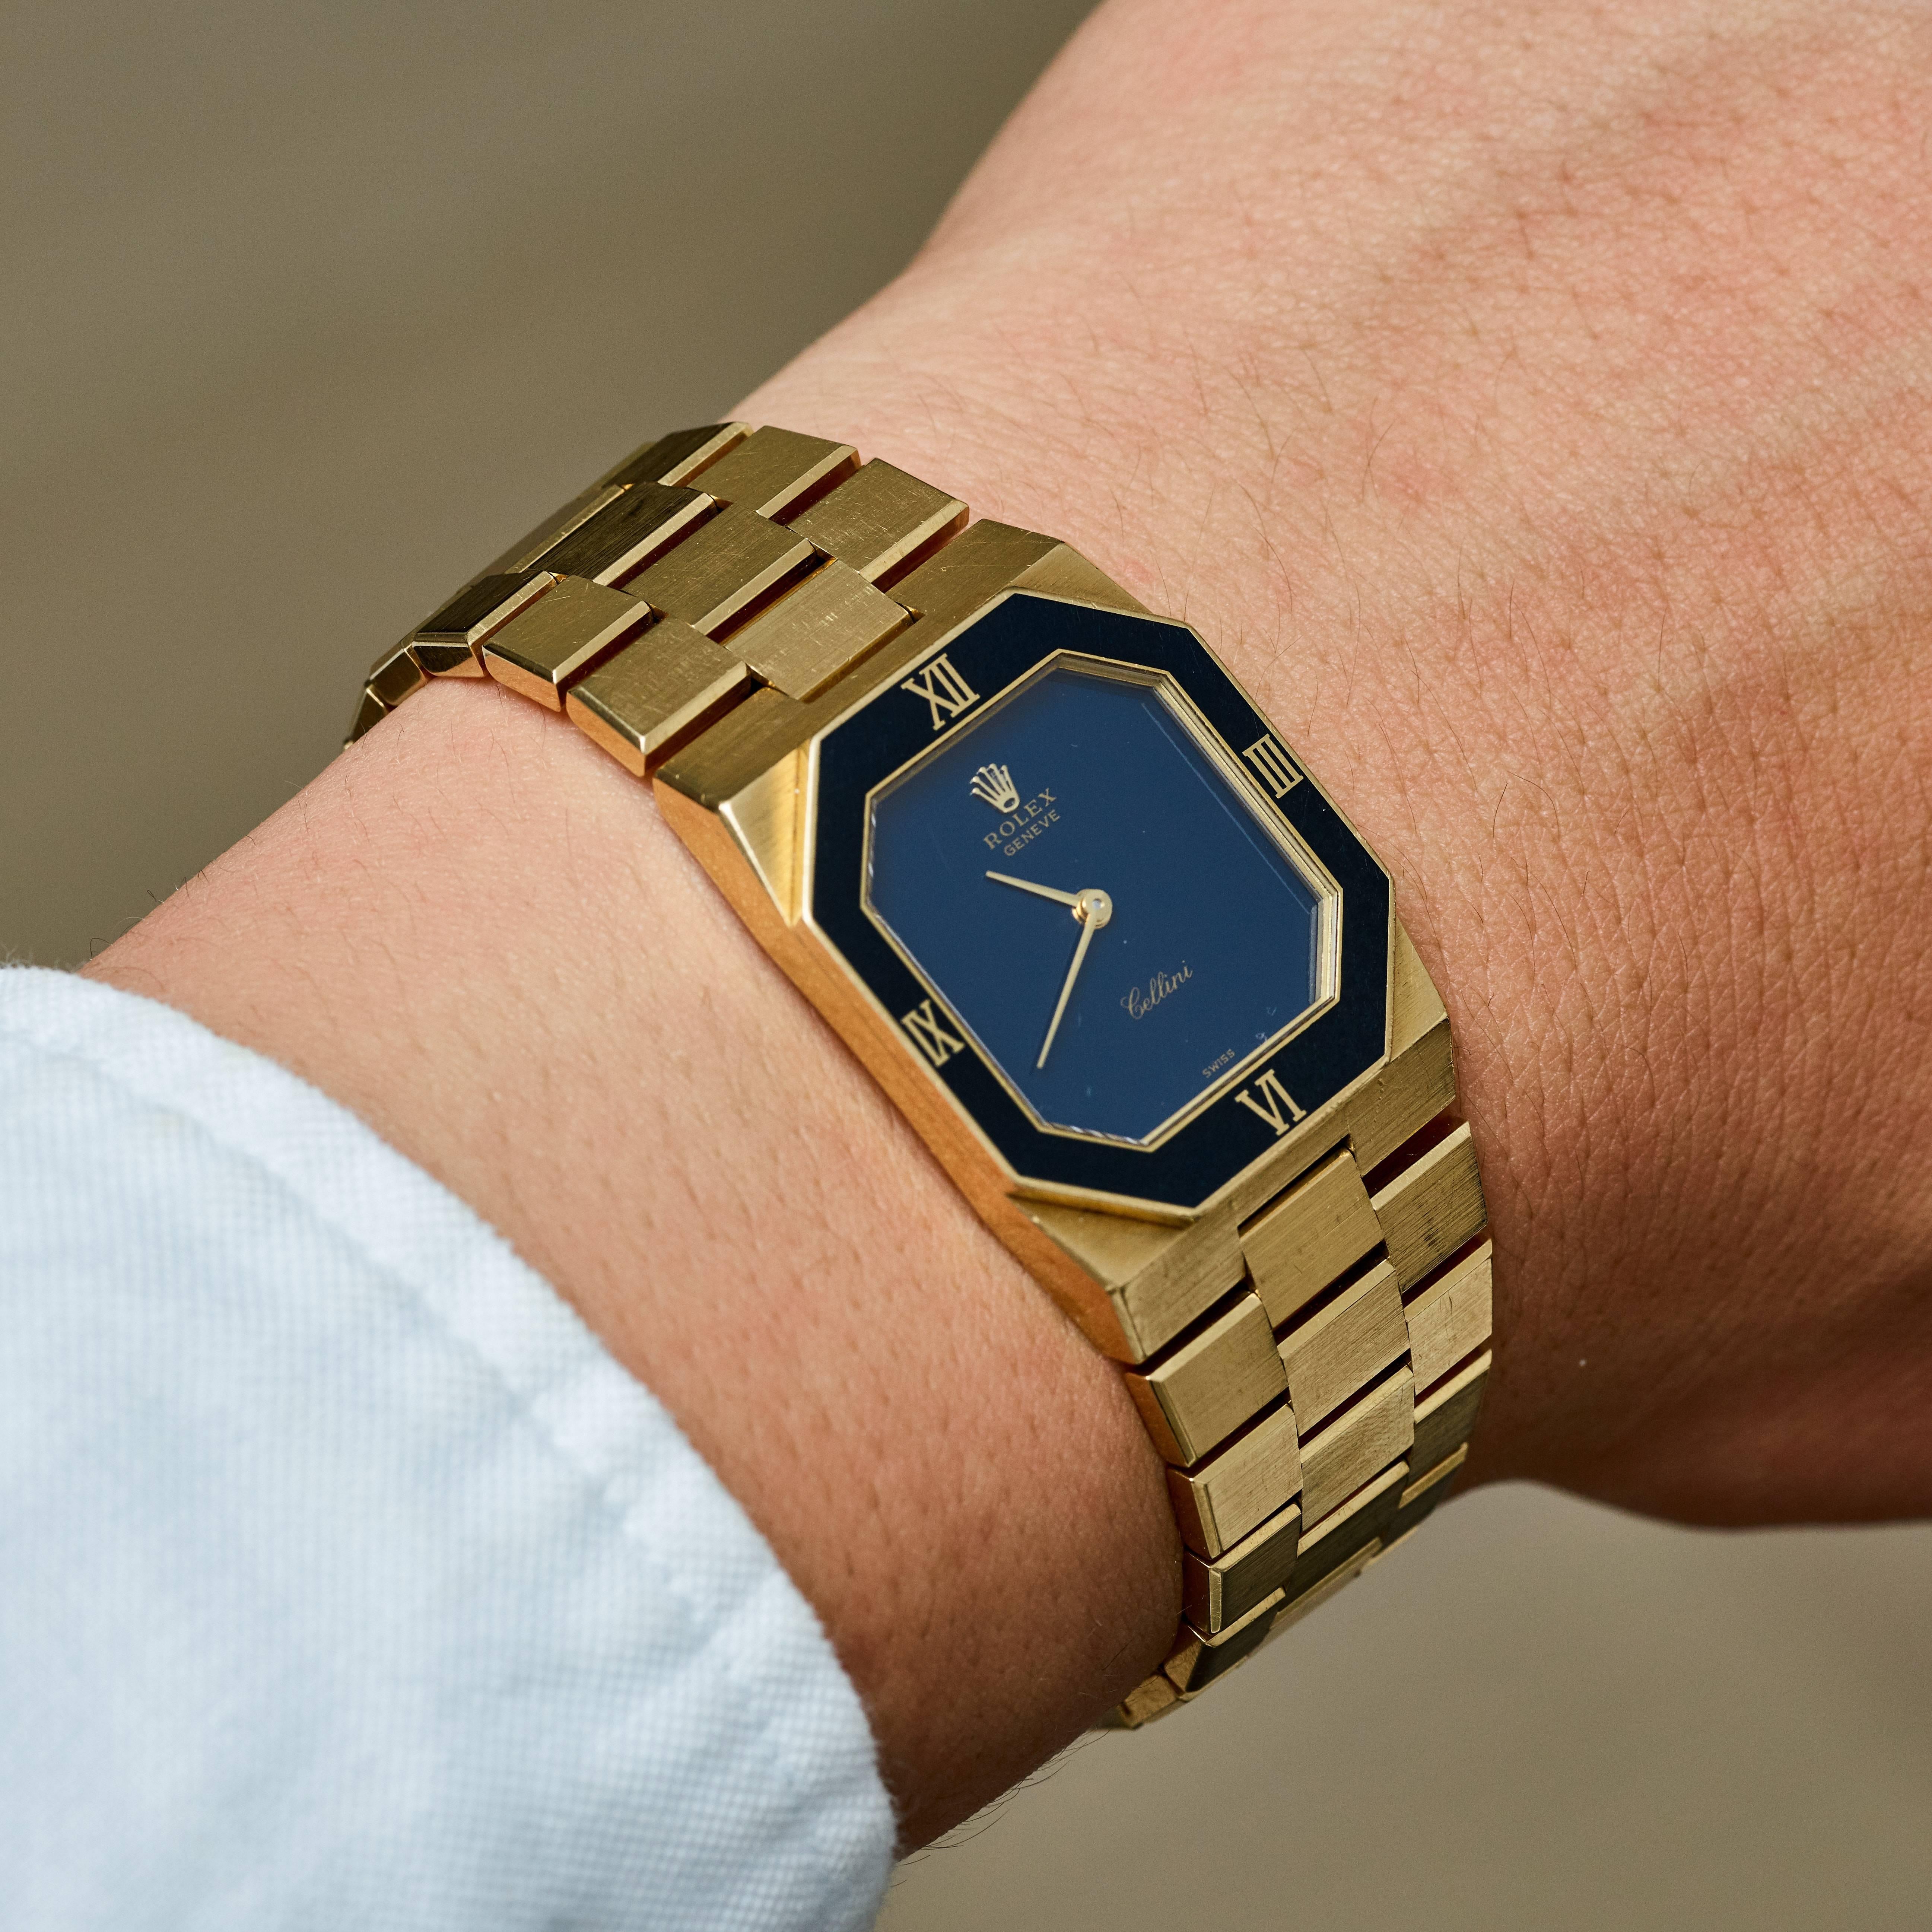 Rolex Cellini 18K Yellow Gold Manual Wind Wristwatch
Factory Blue Stone Dial with Applied Rolex Crown
Solid 18K Yellow Gold Case and Bracelet
Dark Blue Geometrical Bezel ( Bezel shows some signs of wear and marks) with Roman Numeral Markers 
24mm x